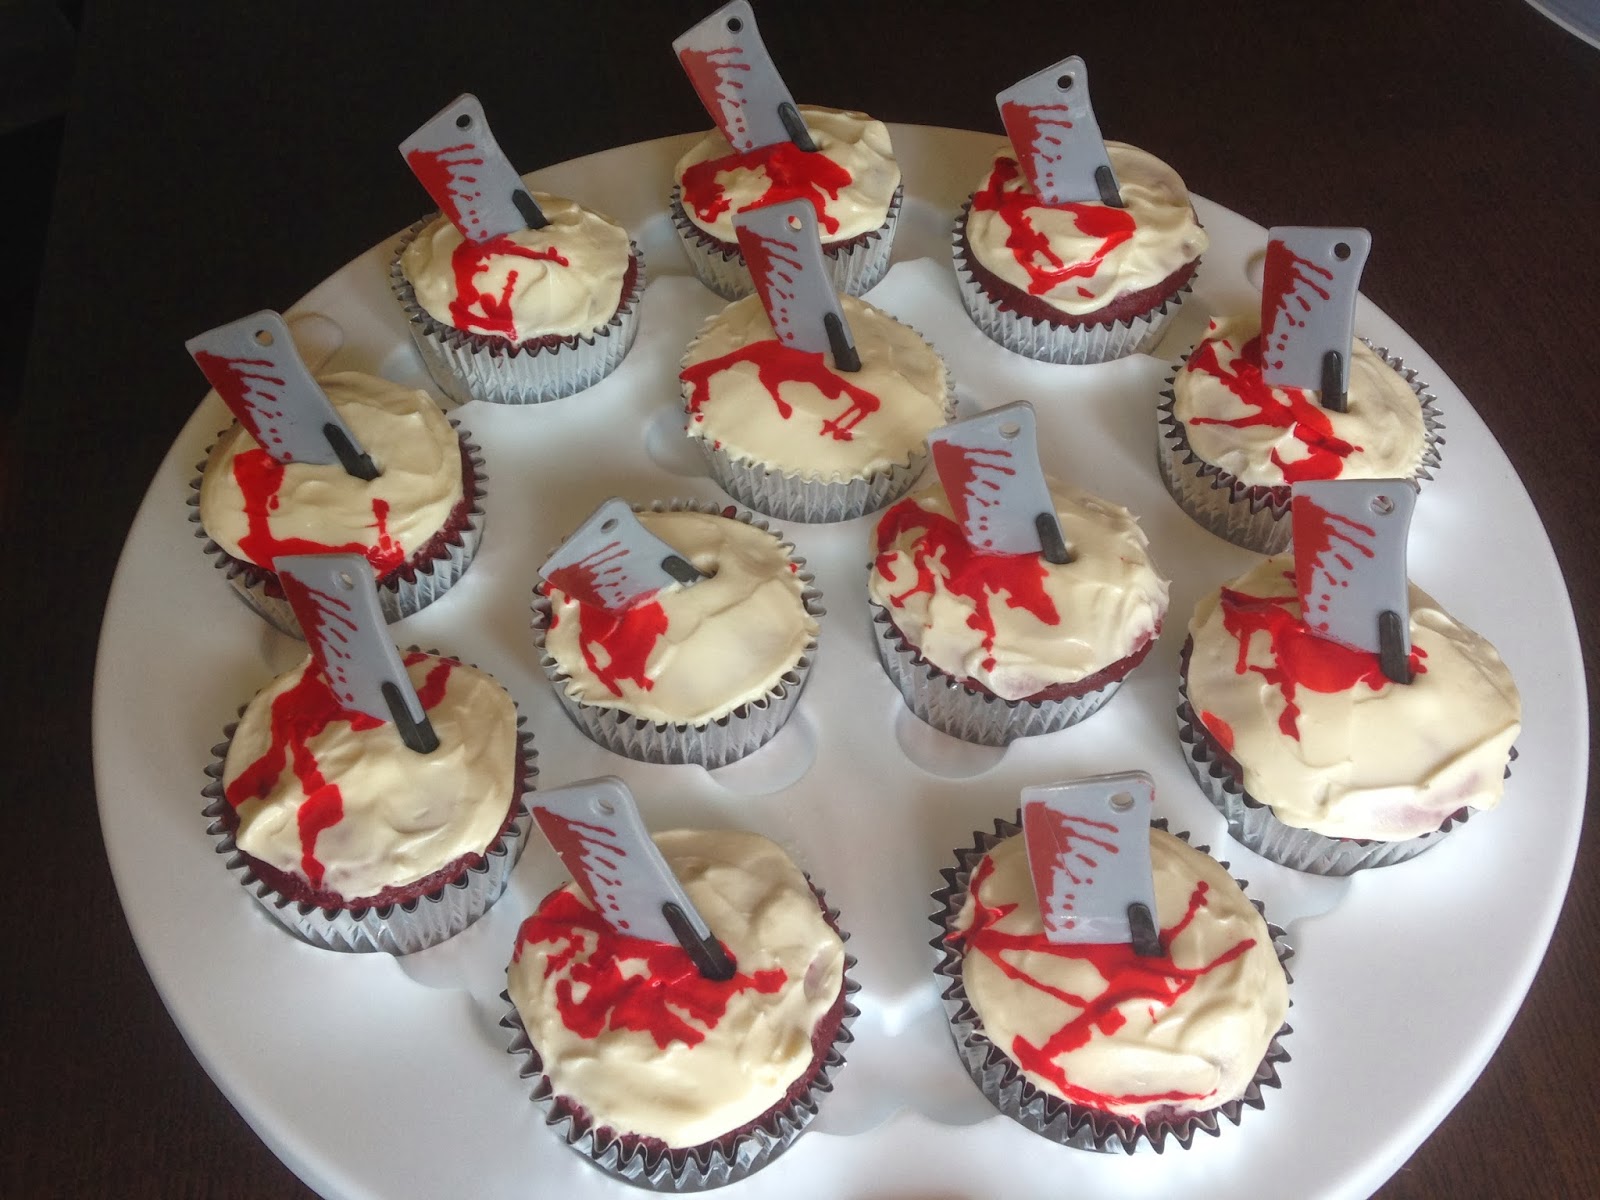 How To, How Hard, and How Much: Killer Cleaver Cupcakes